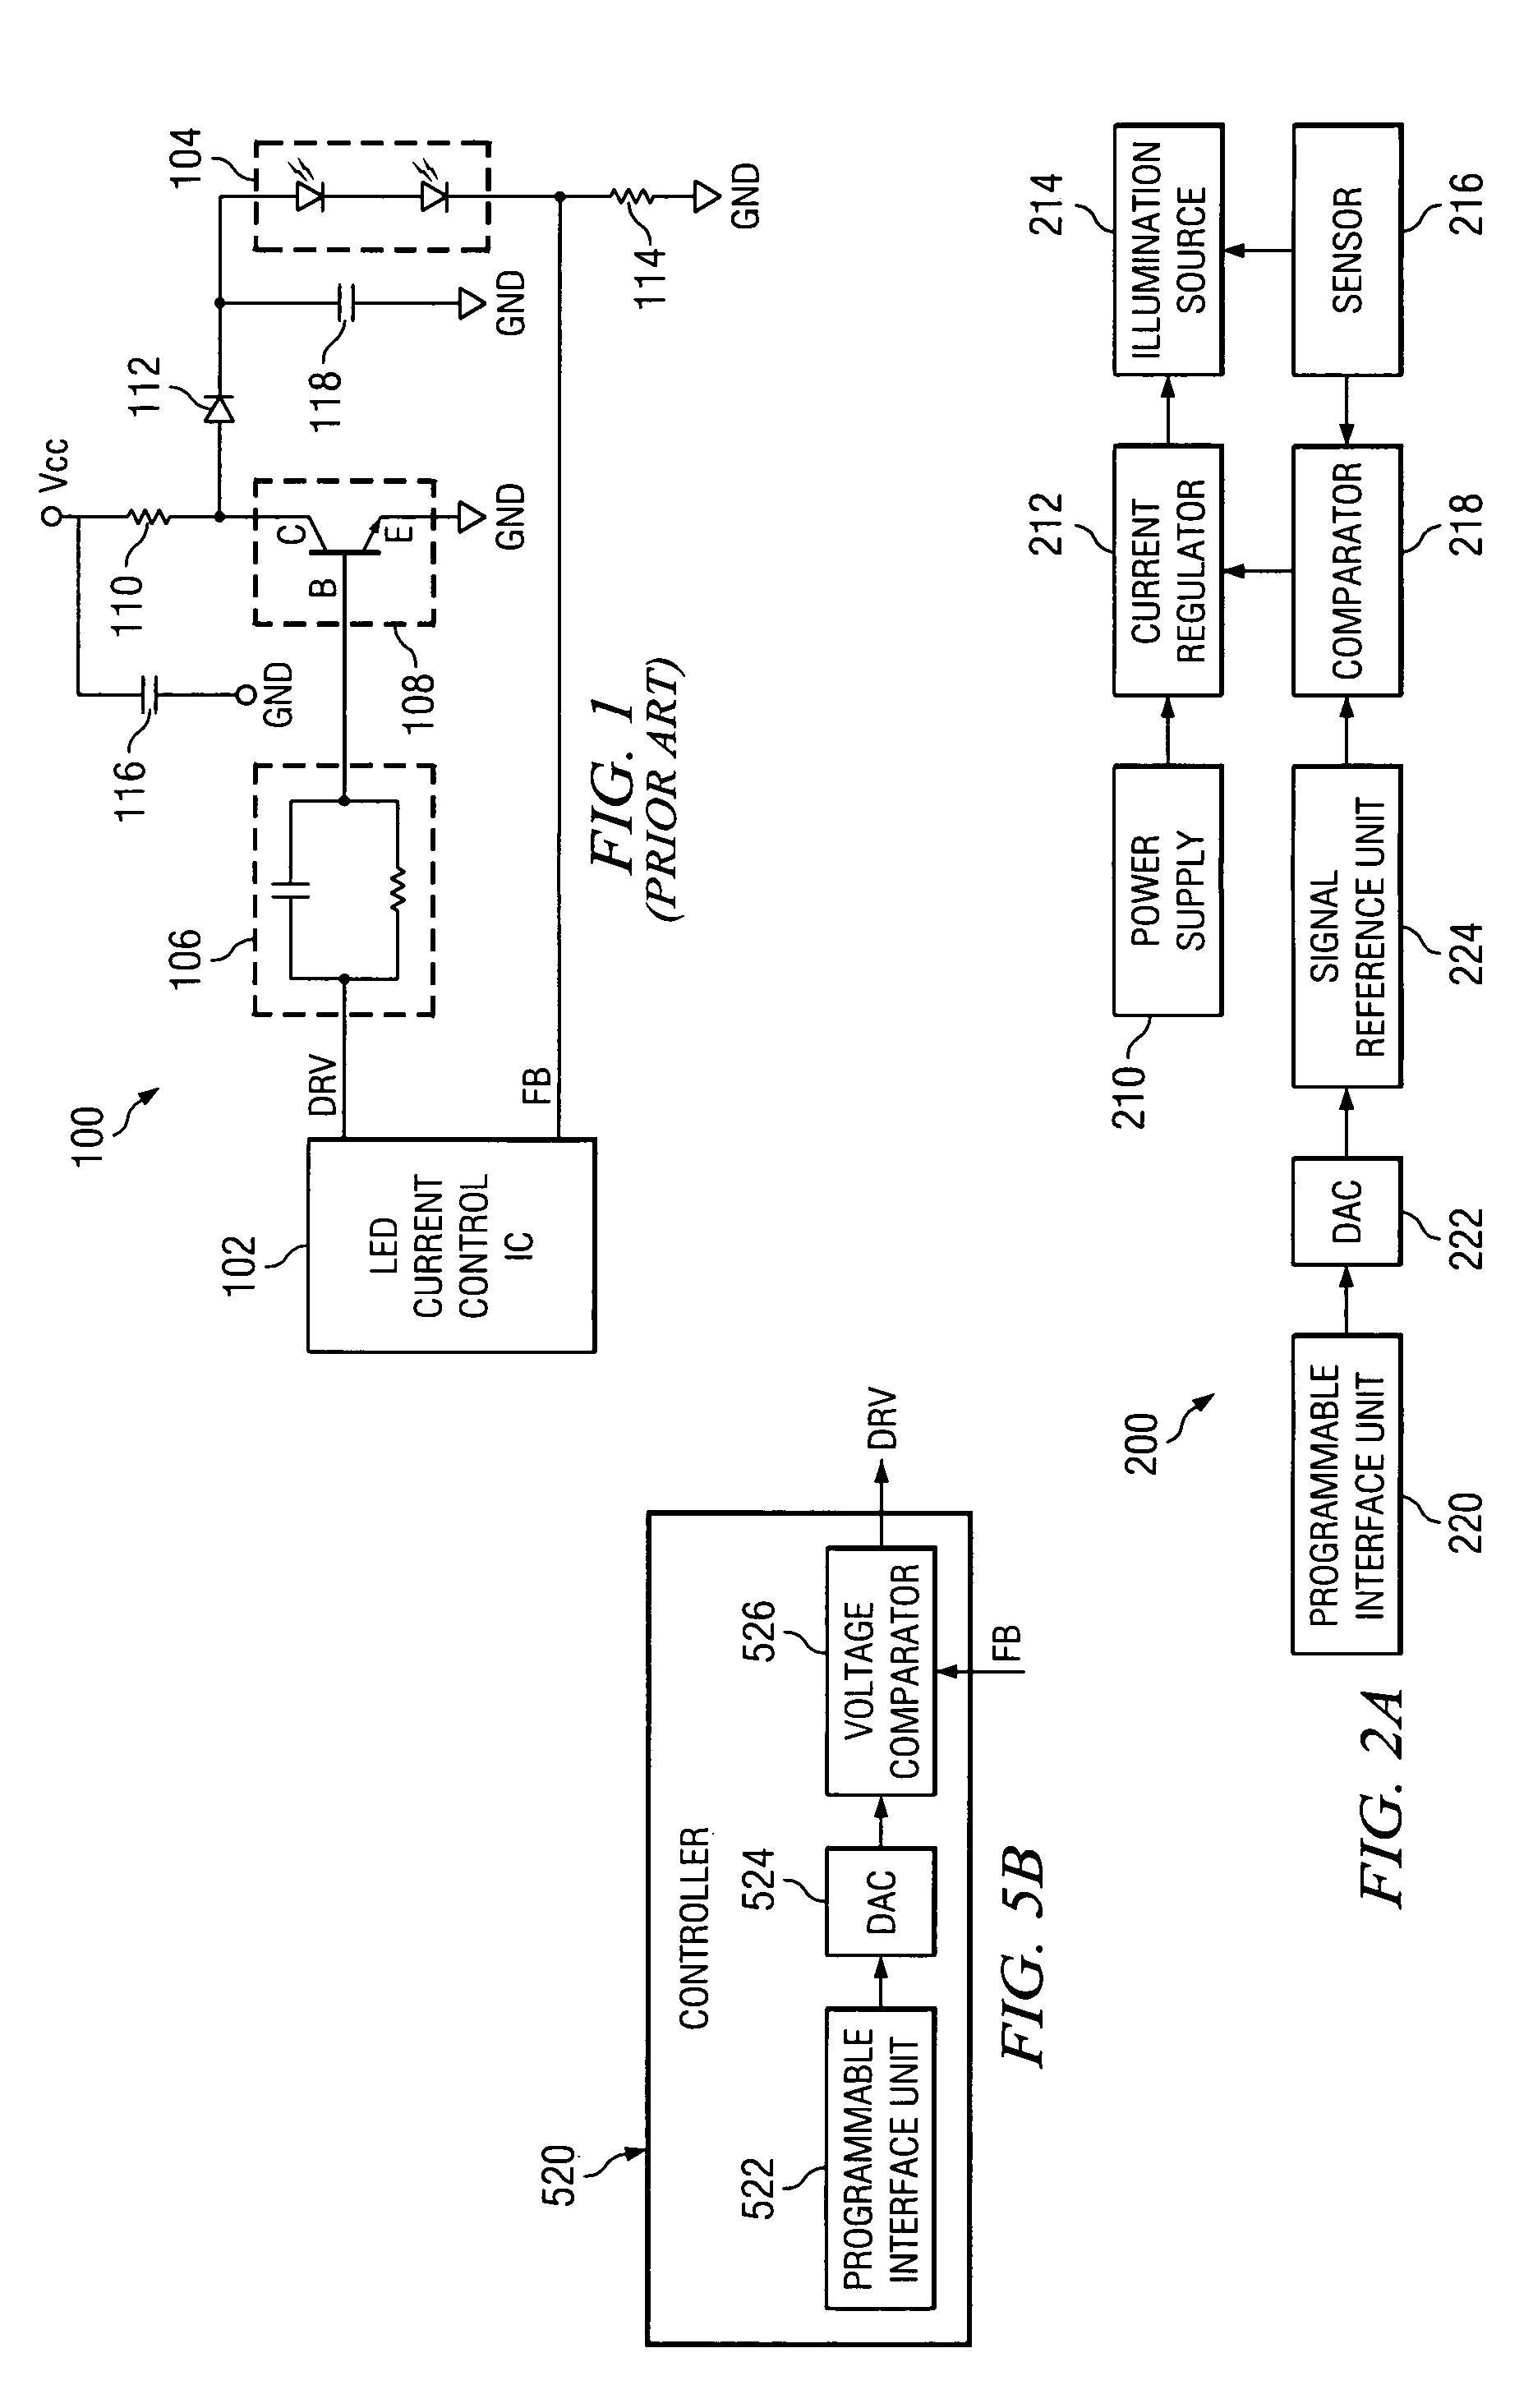 Method and apparatus for controlling driving current of illumination source in a display system